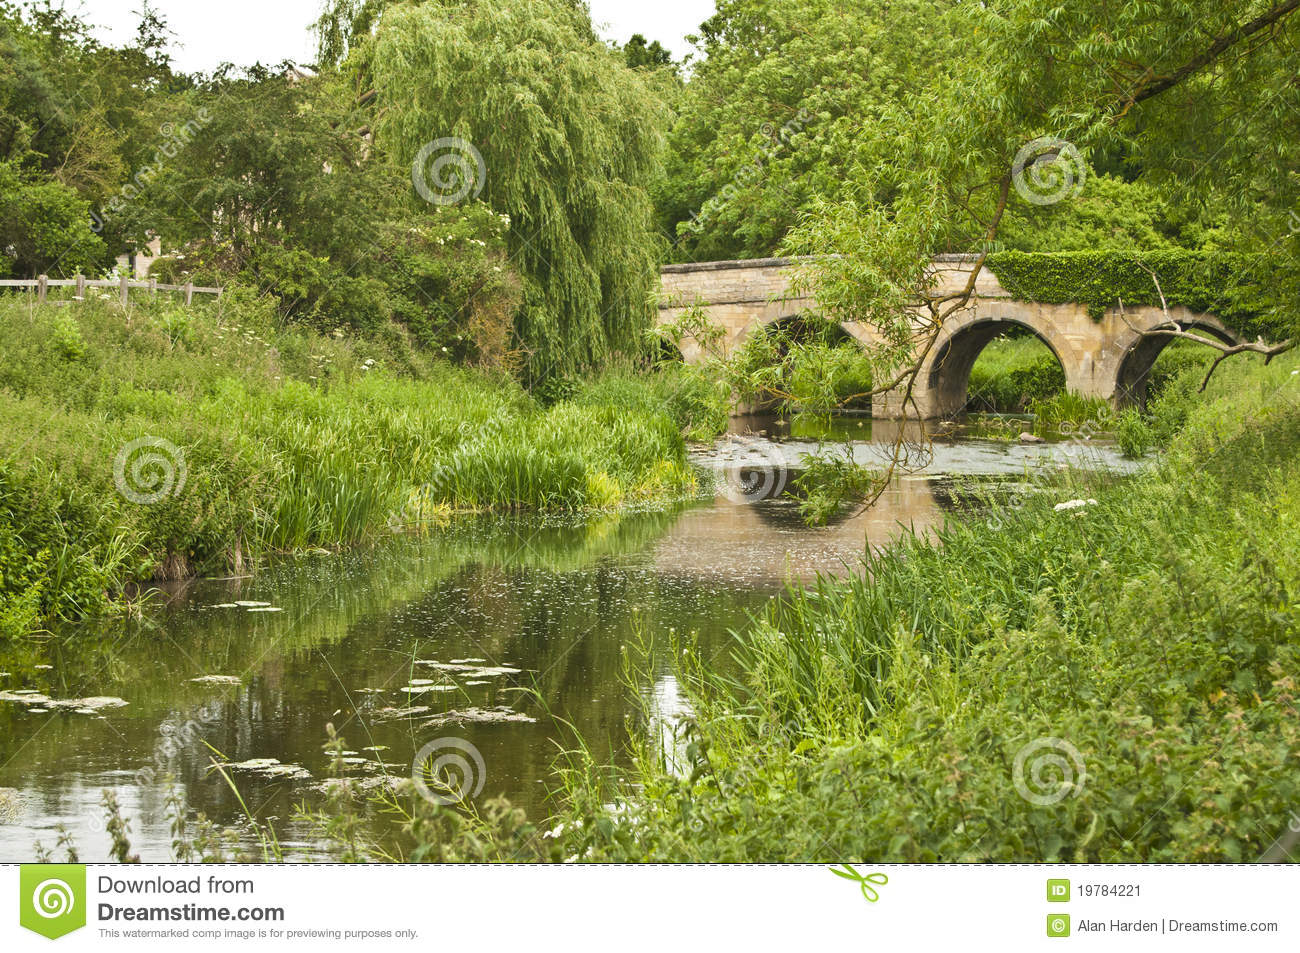 Country Bridge Over A River Stock Image   Image  19784221